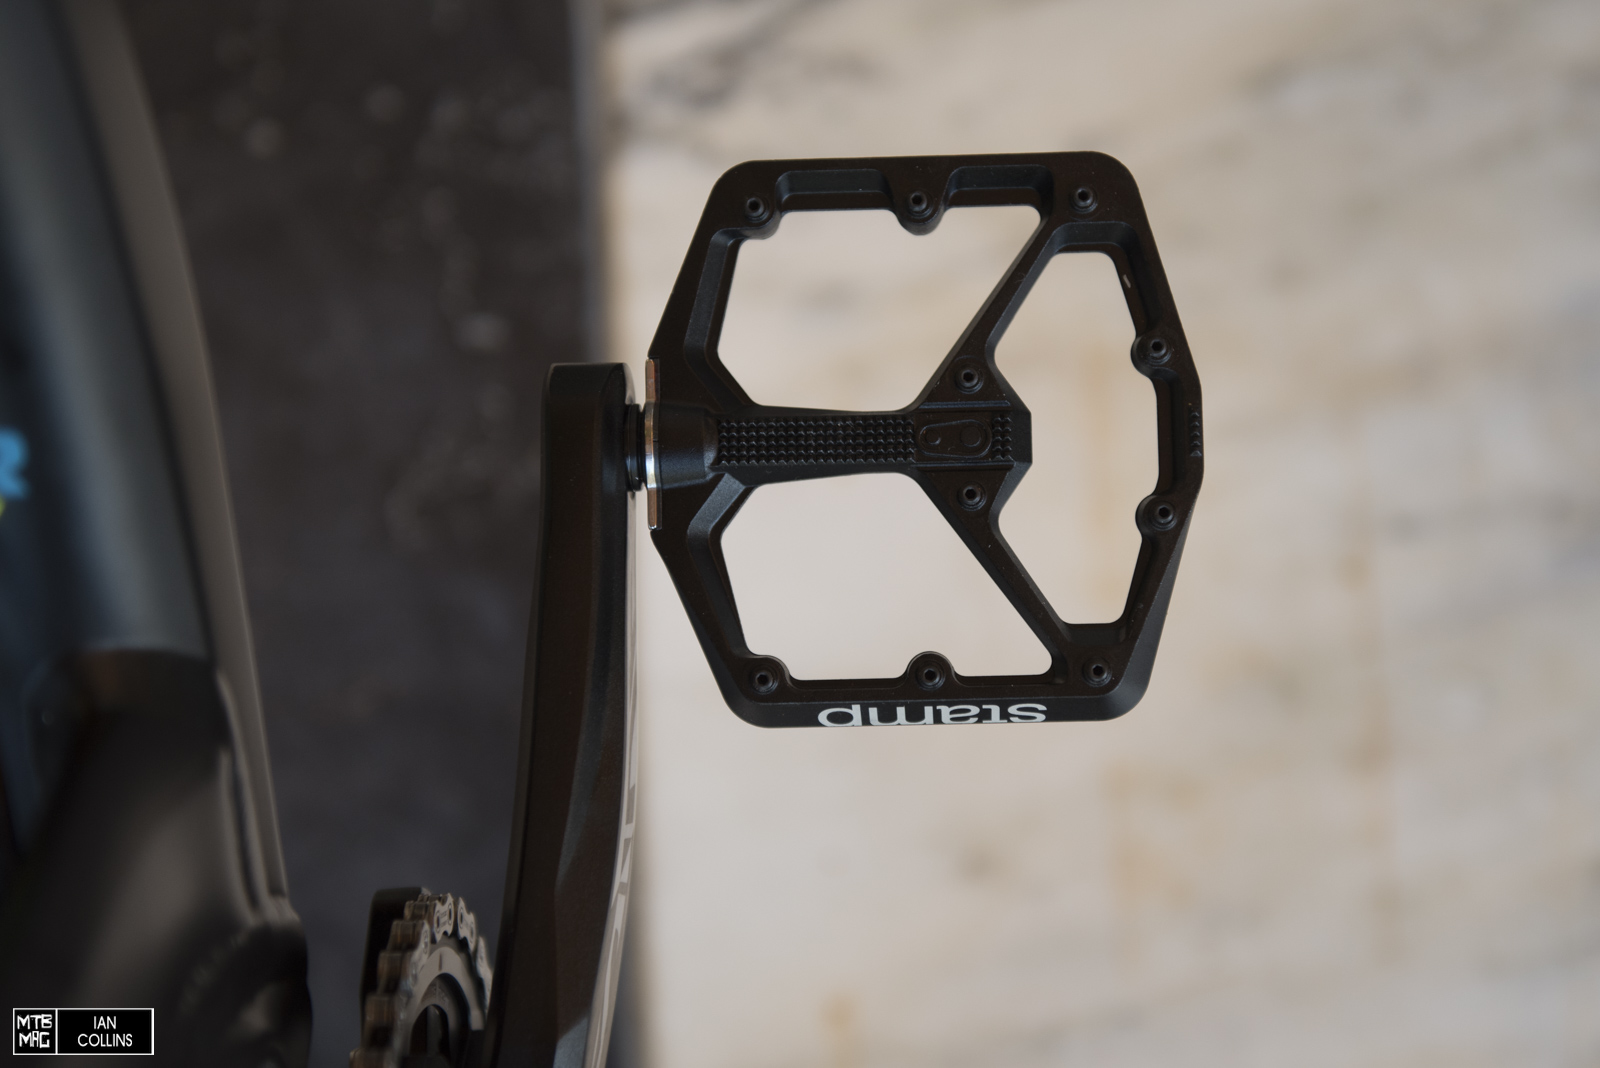 The new Crank Brothers Stamp Flat pedals come in two sizes. Sam is no small Lad so he runs the bigger of the two.